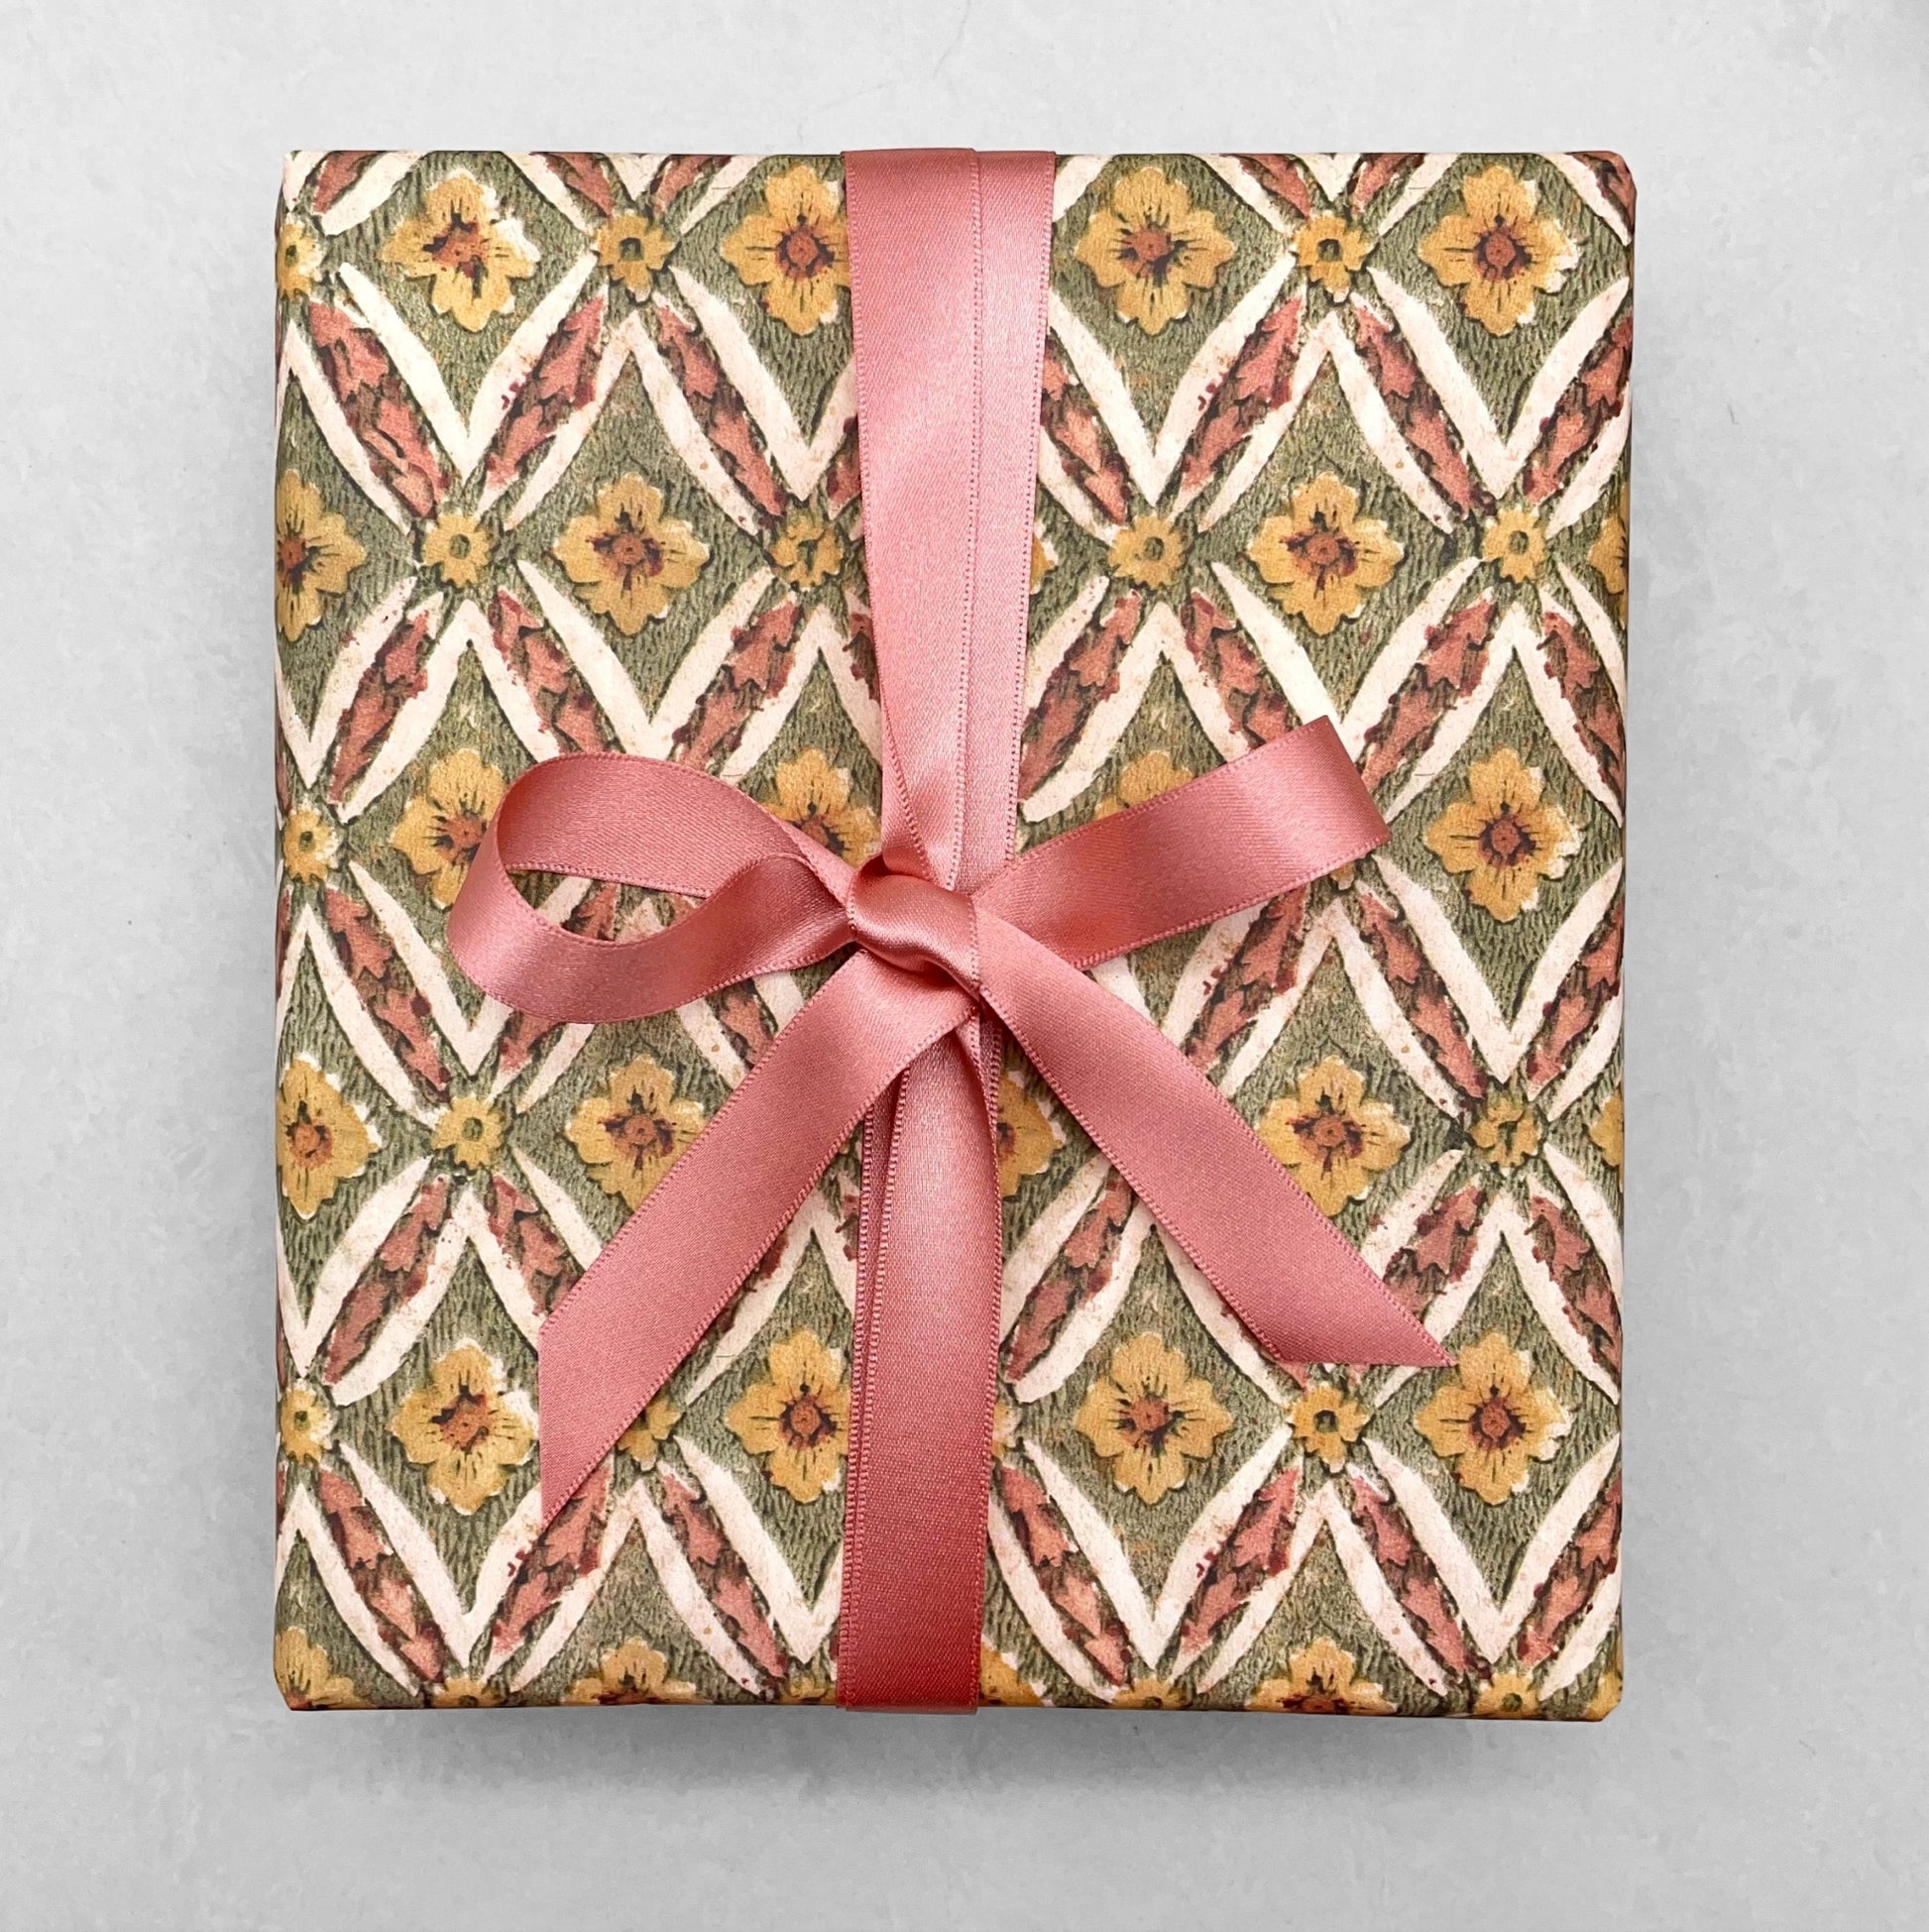 italian Remondini patterned wrapping paper by Tassotti. a repeat diamond pattern with flowers in sage green, soft peach and yellow on white background. Wrapped with a pink ribbon bow